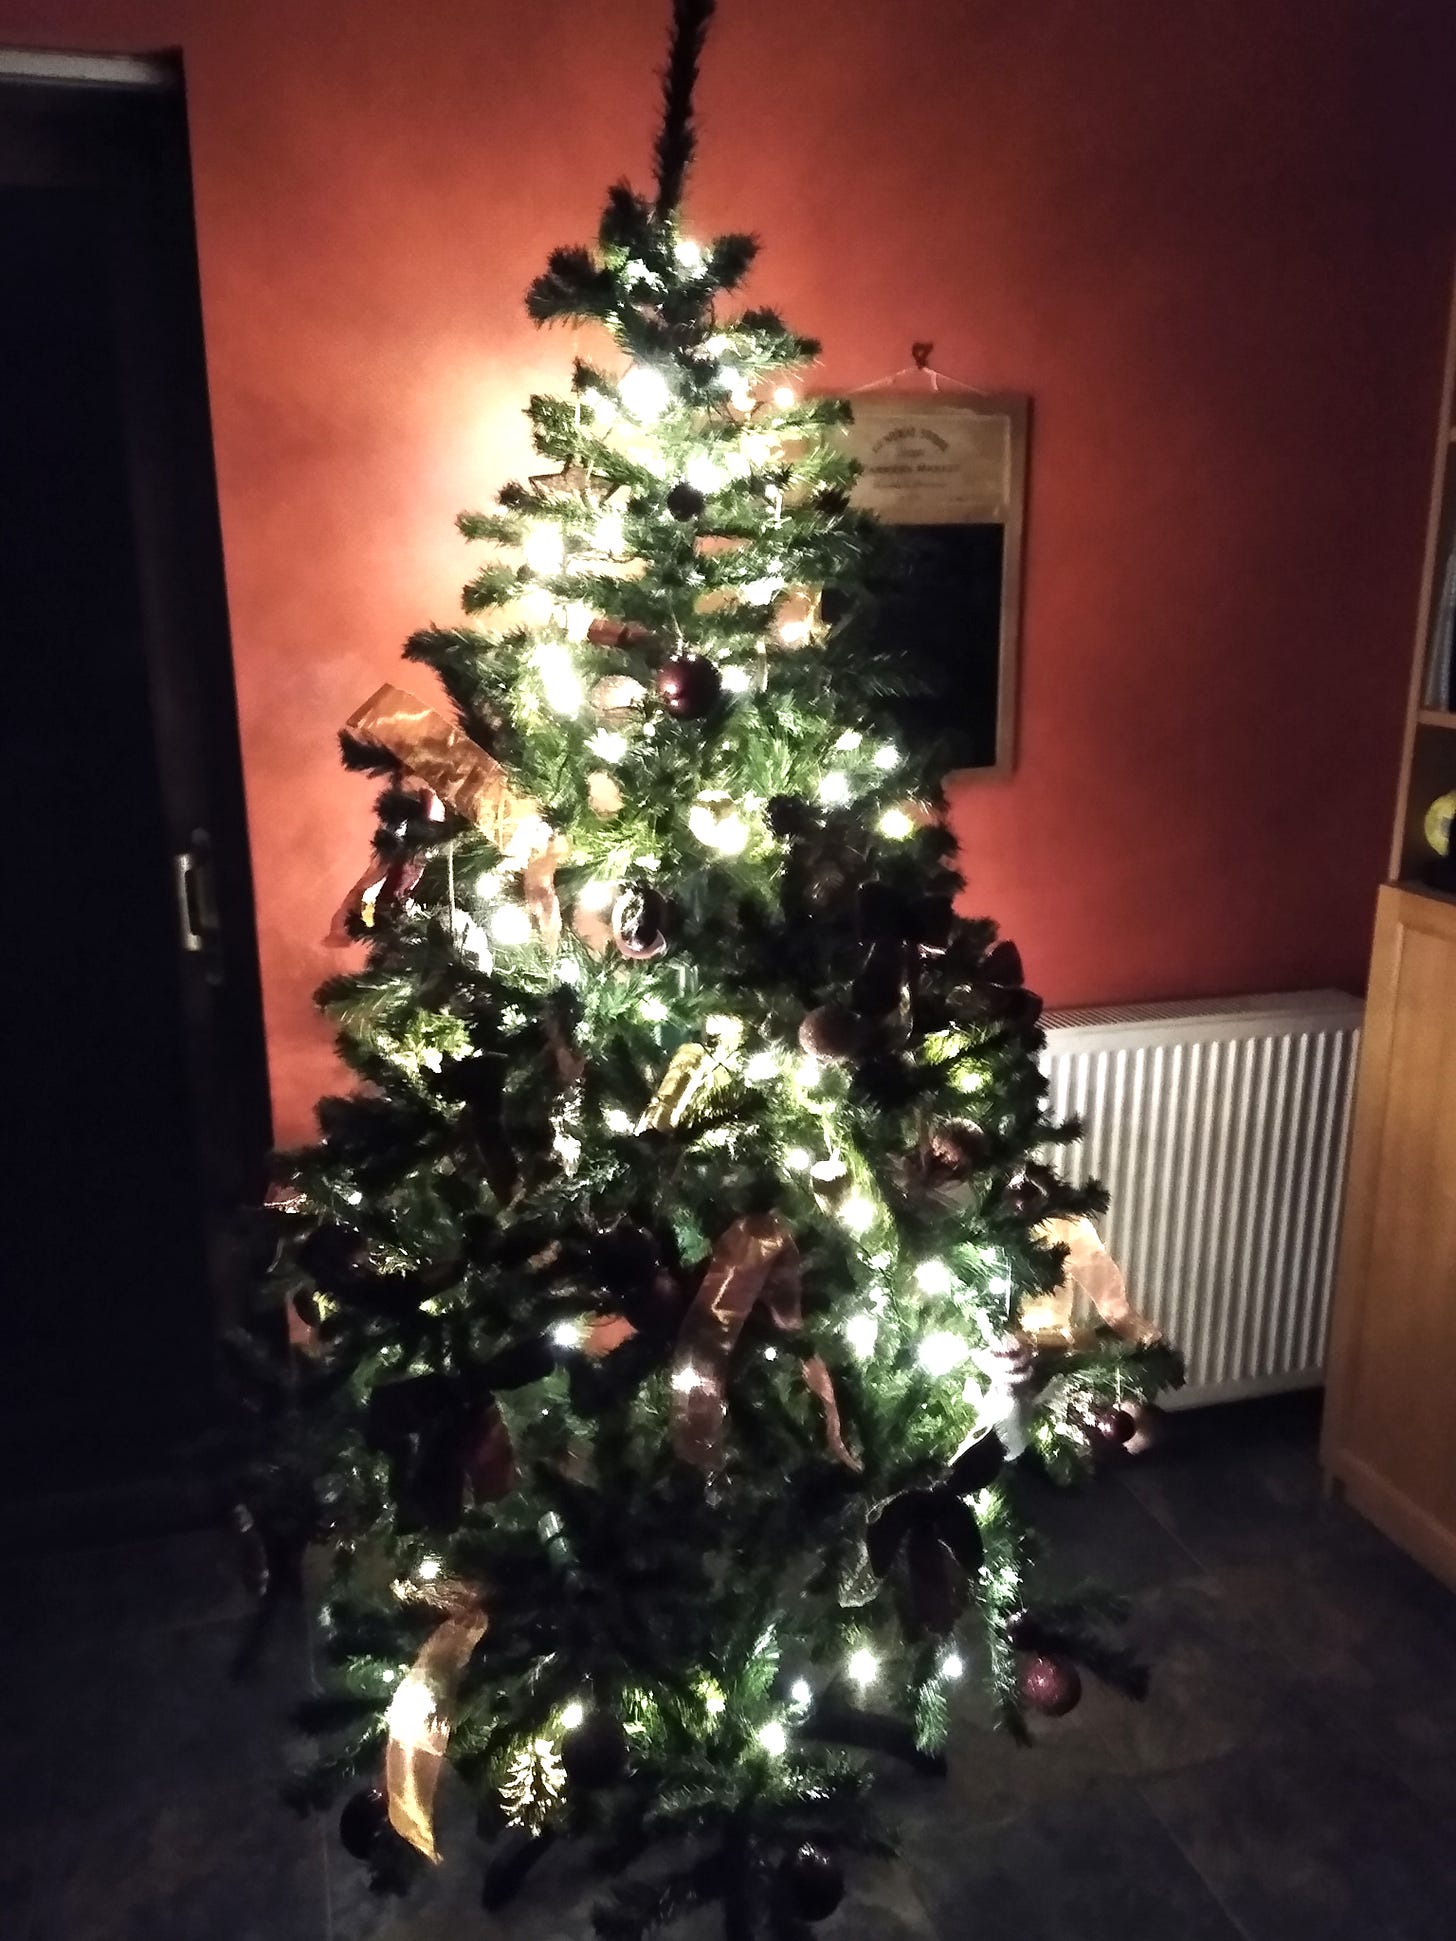 A photo of a Christmas tree festooned with lights